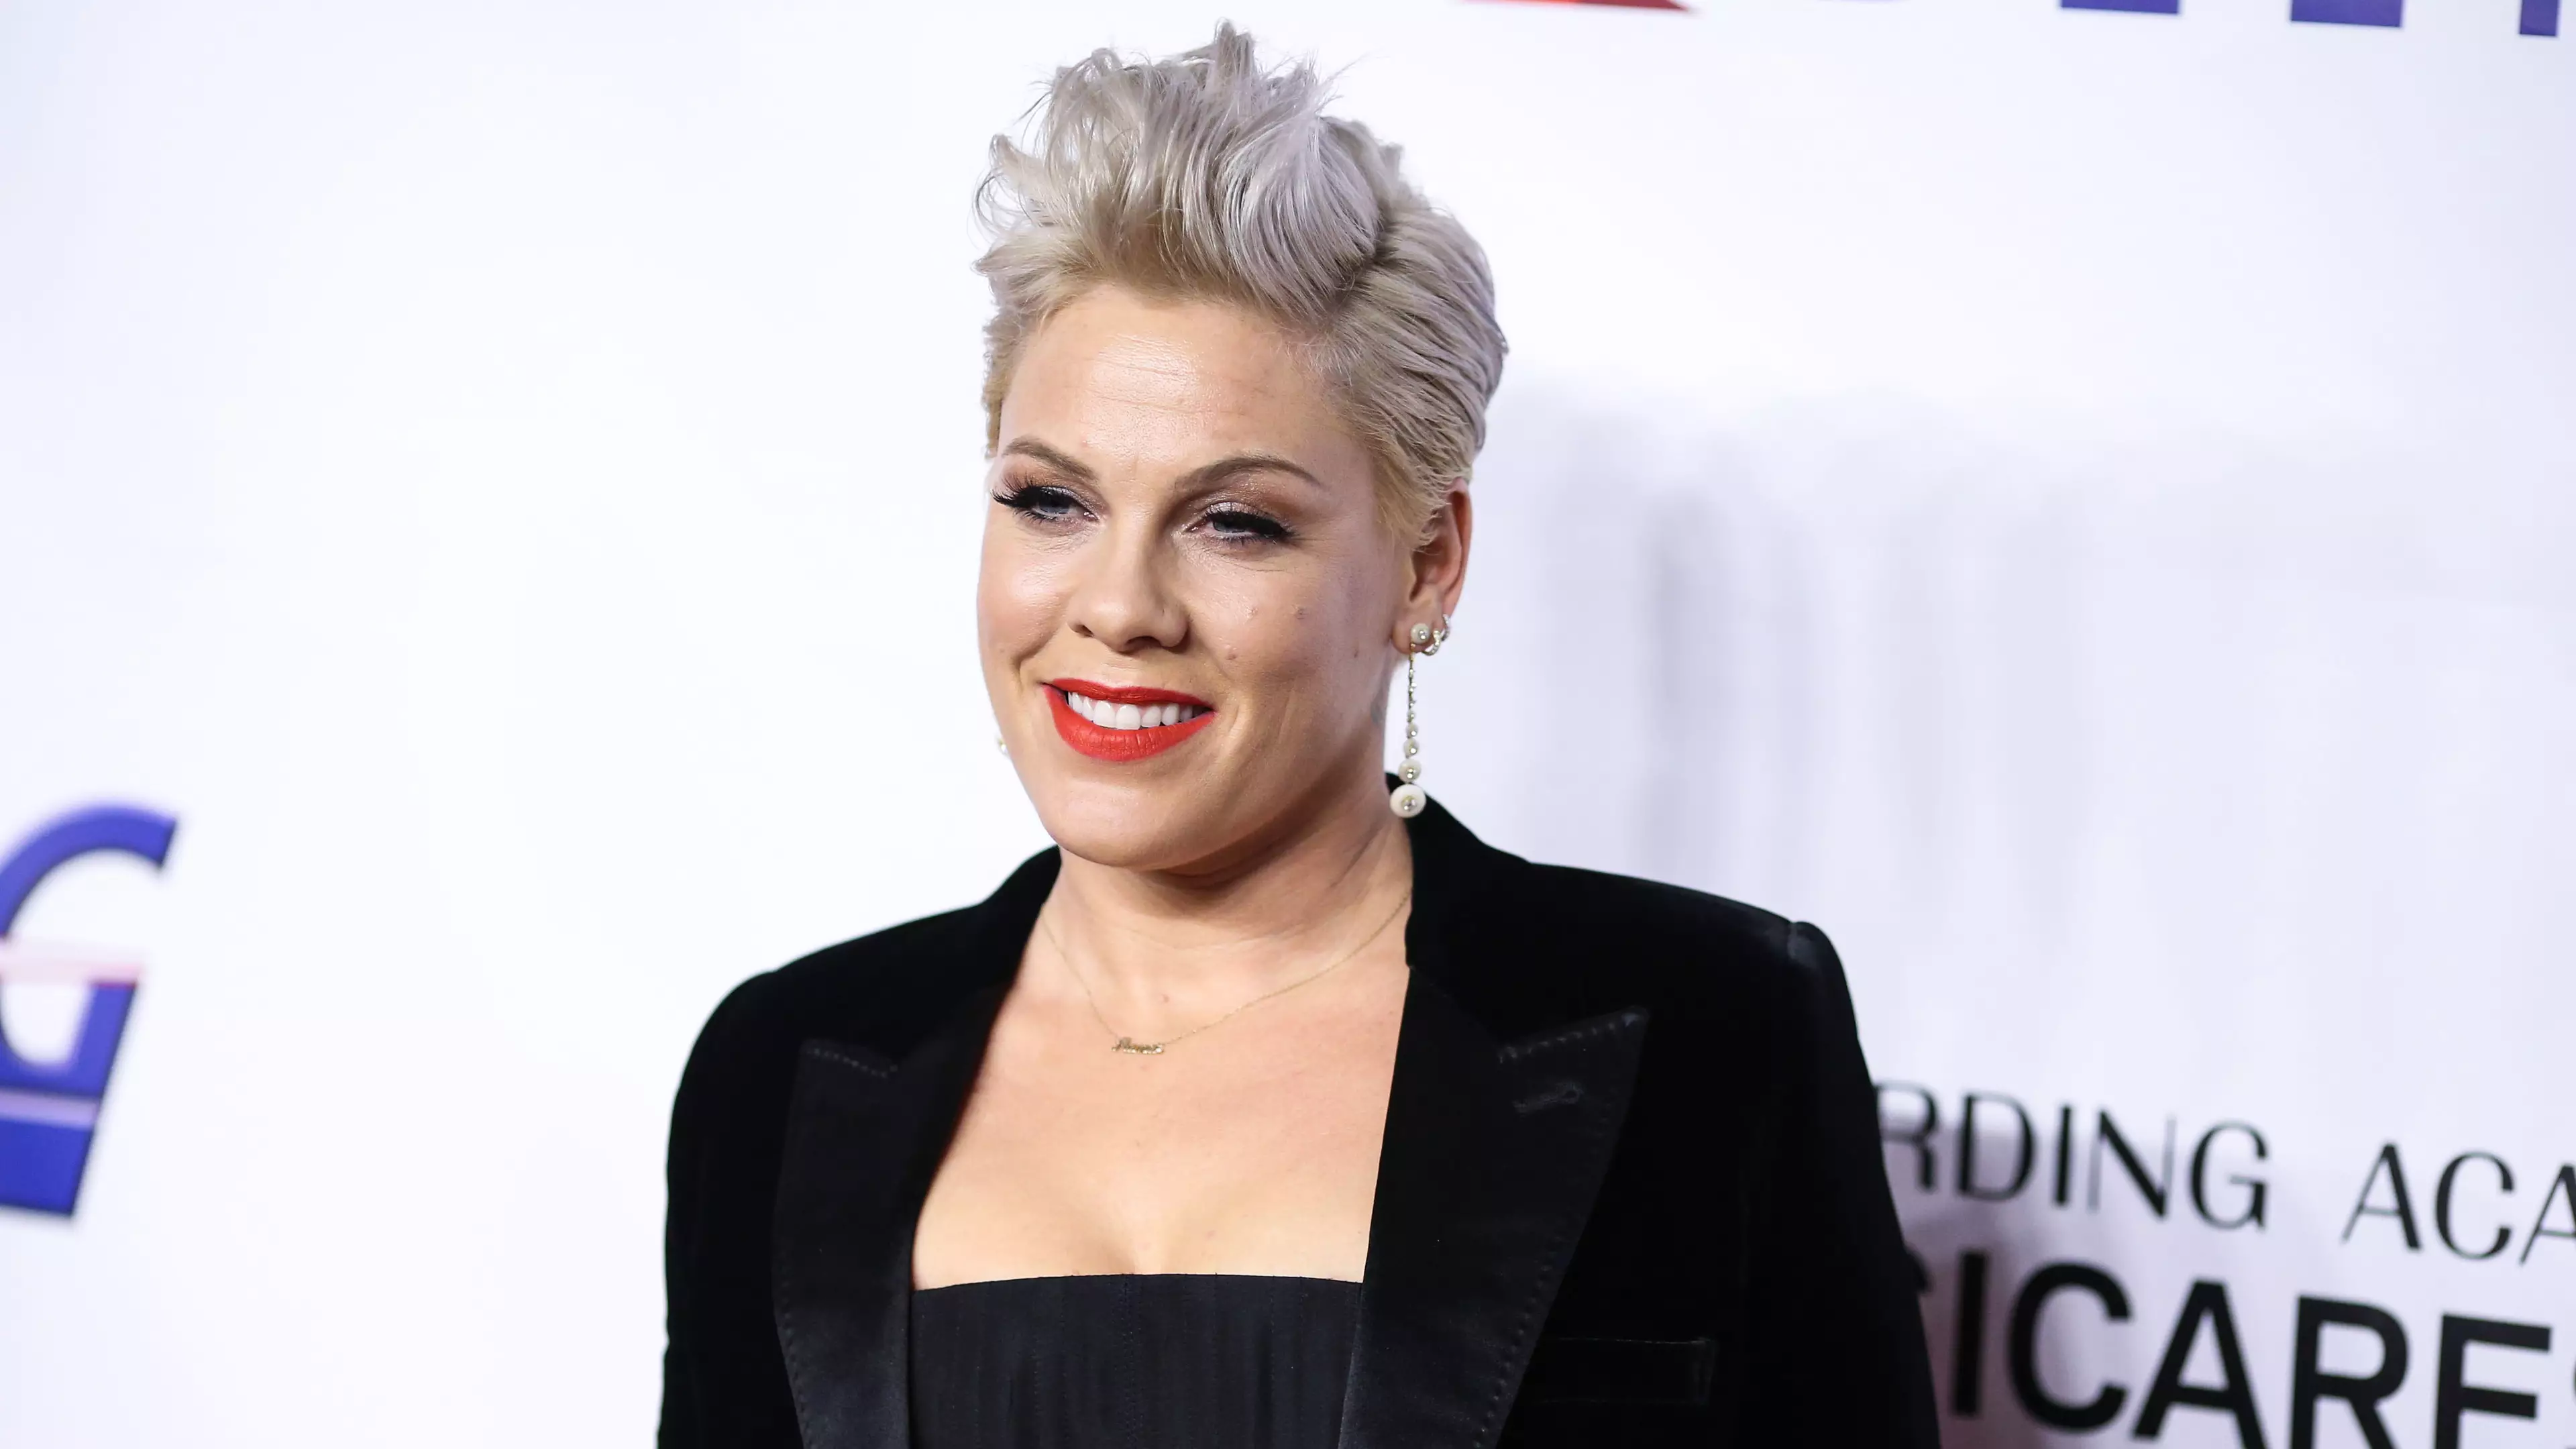 P!nk's Kids Make Her Homemade Grammy Award As She Misses Out On Win